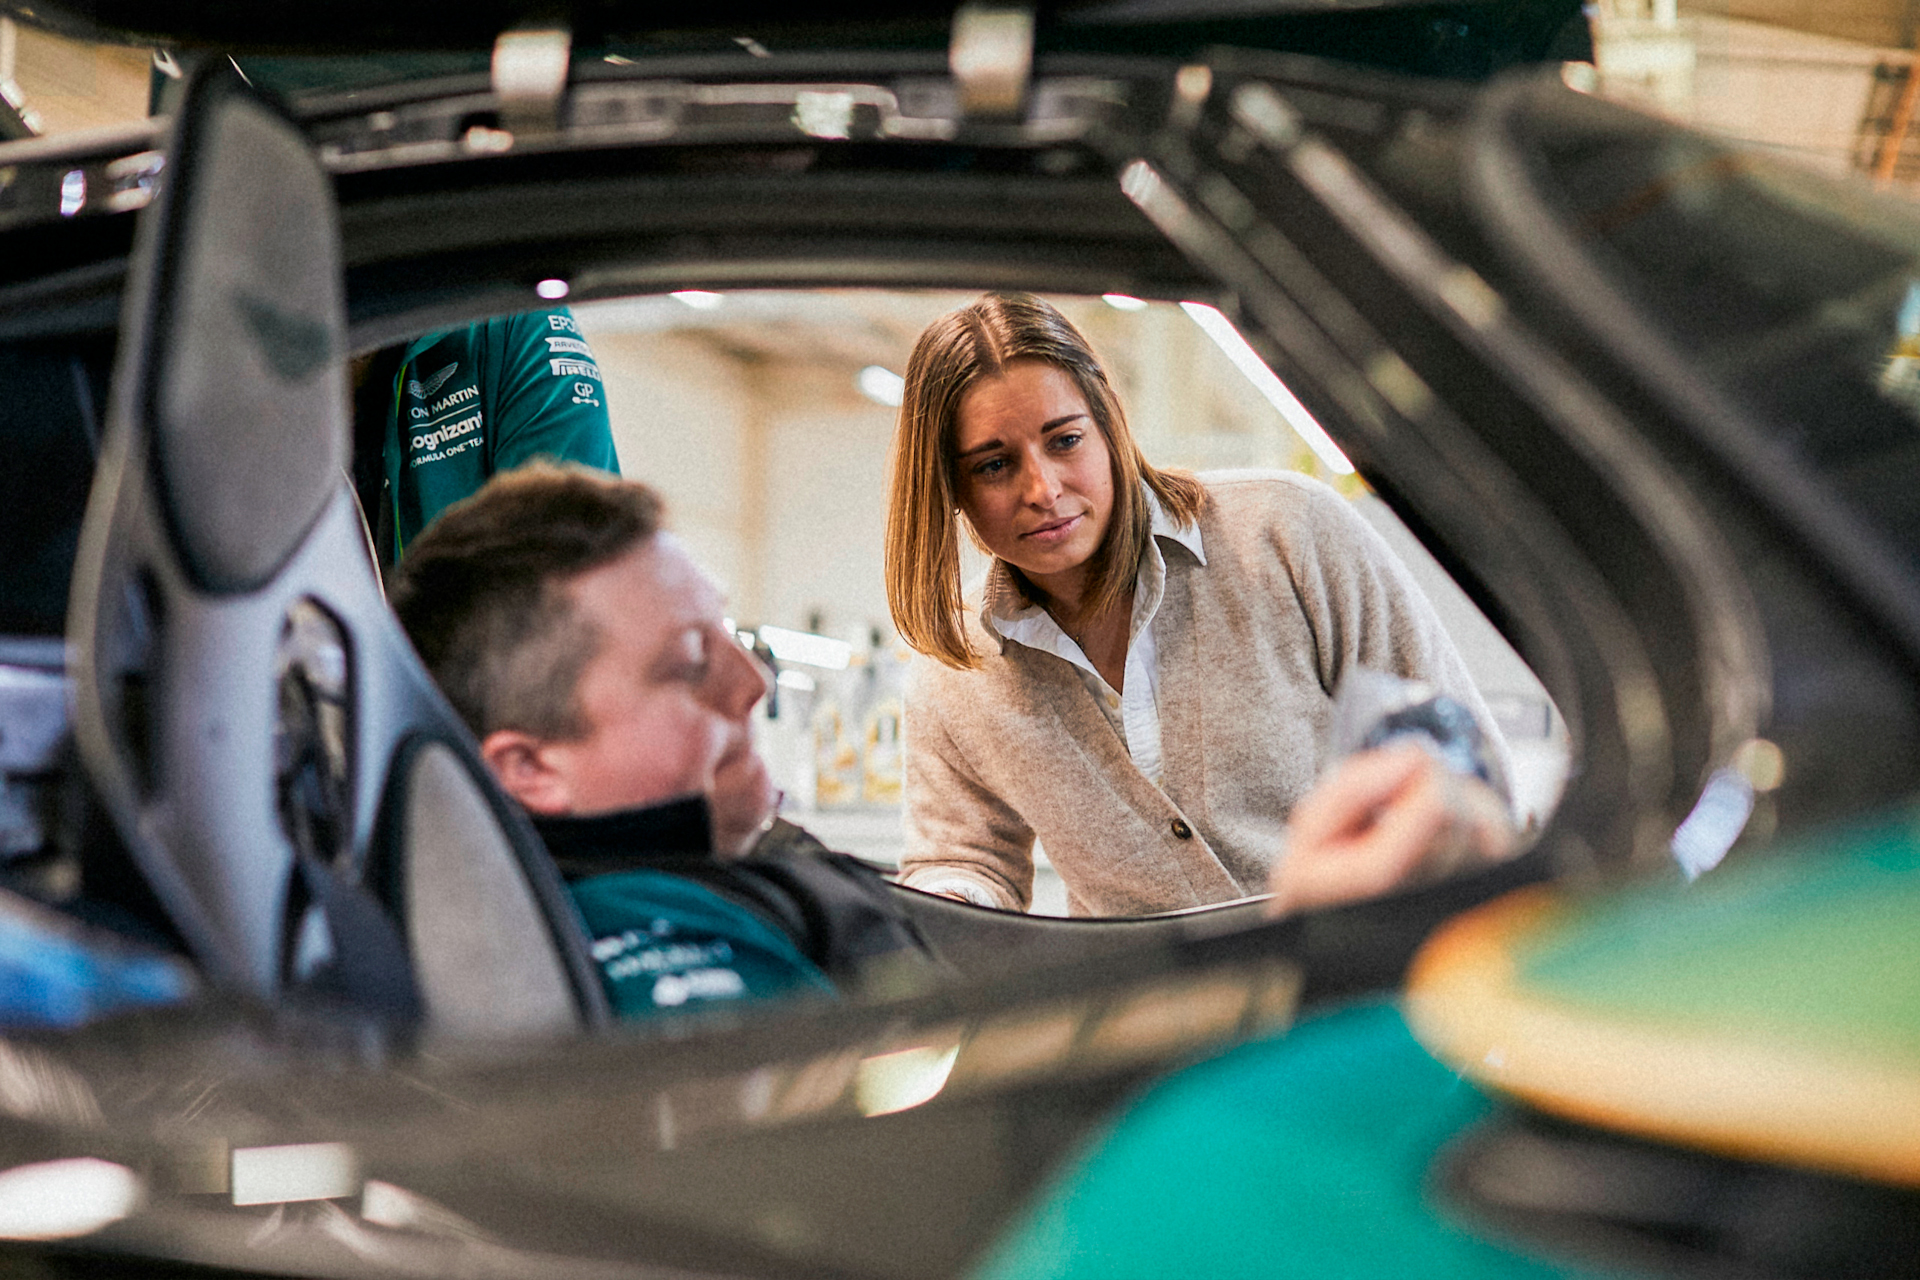 Aston Martin opens its doors to ambitious women and girls on International Women’s Day